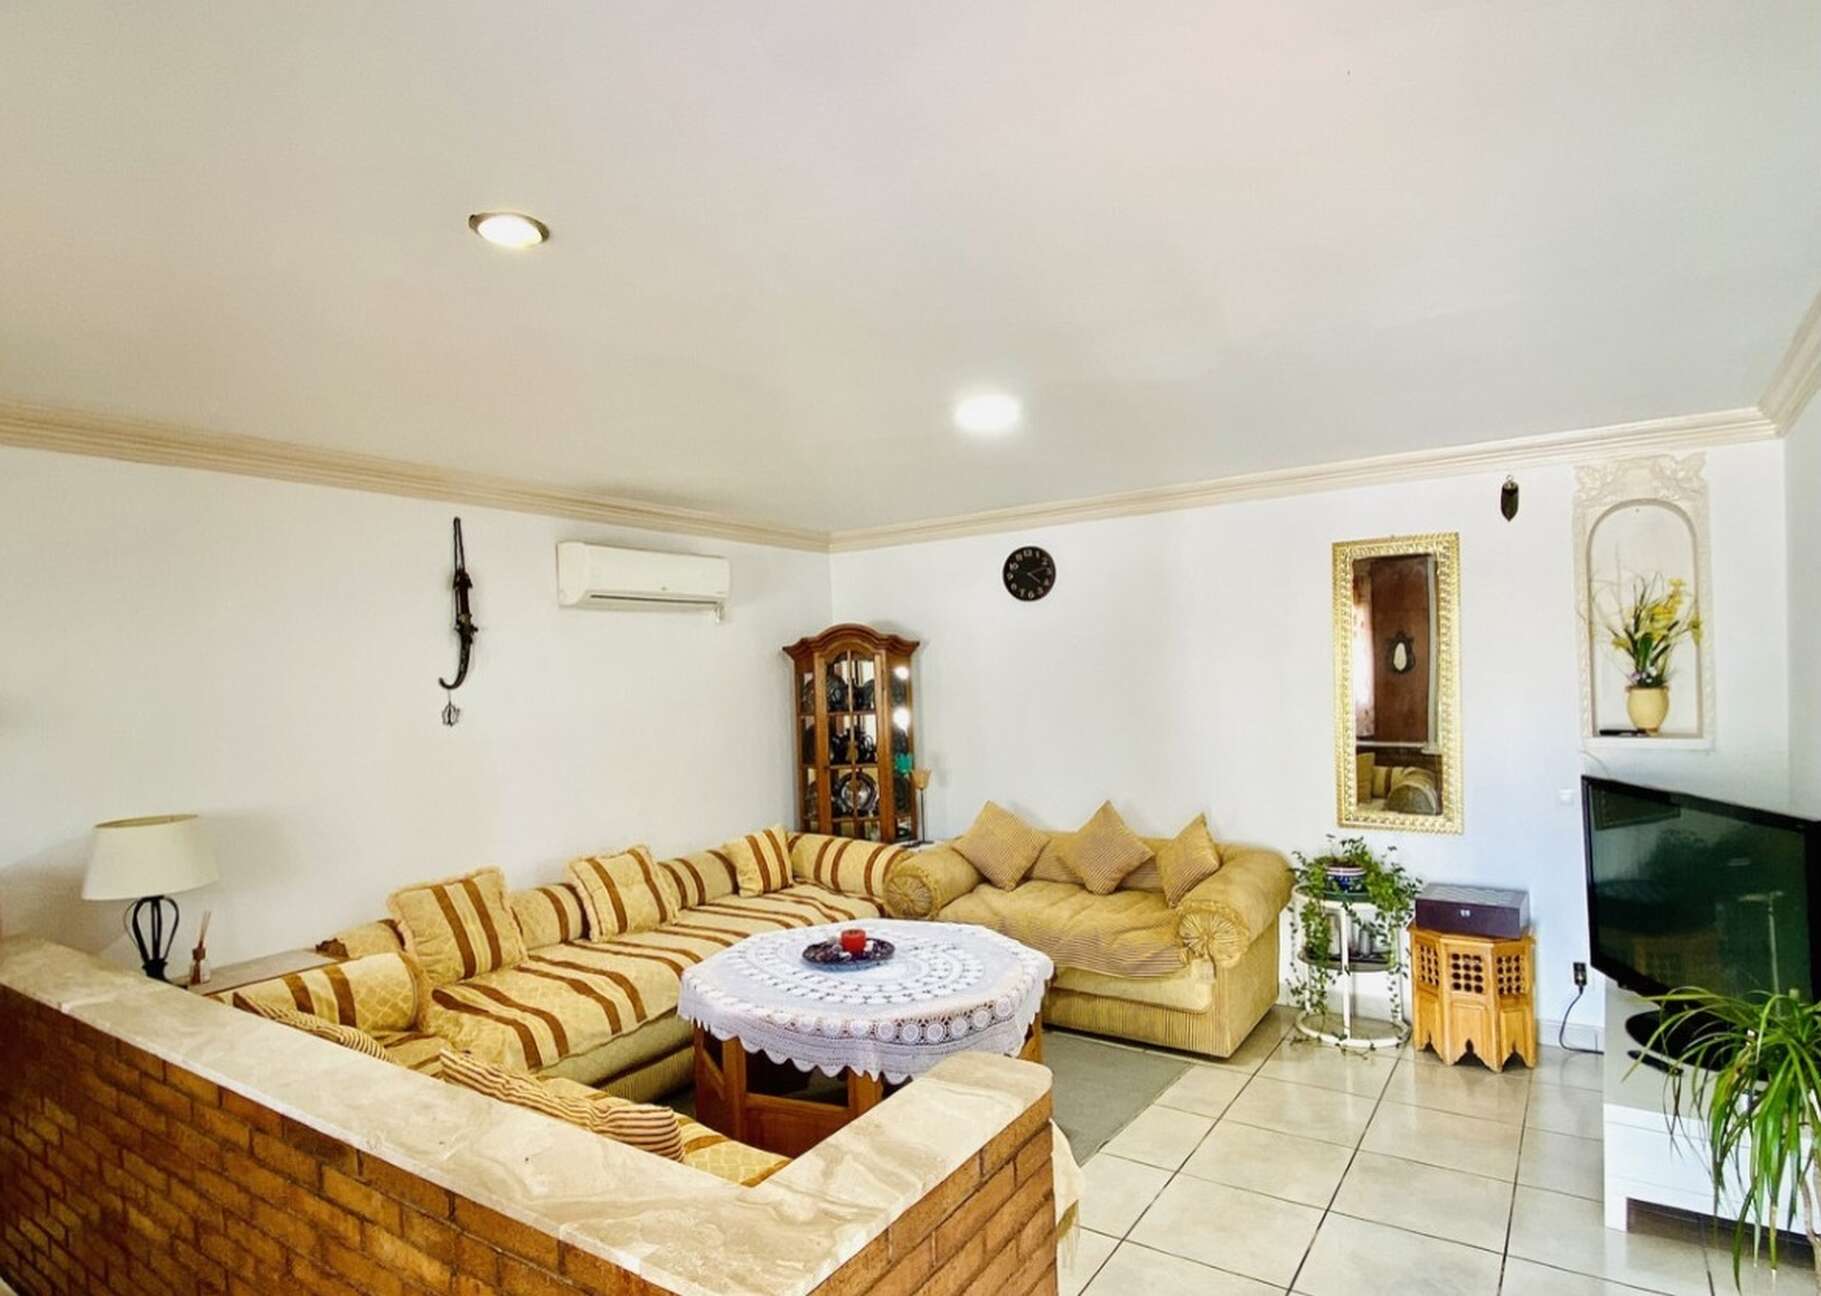 House with large plot and pool for sale in Empuriabrava